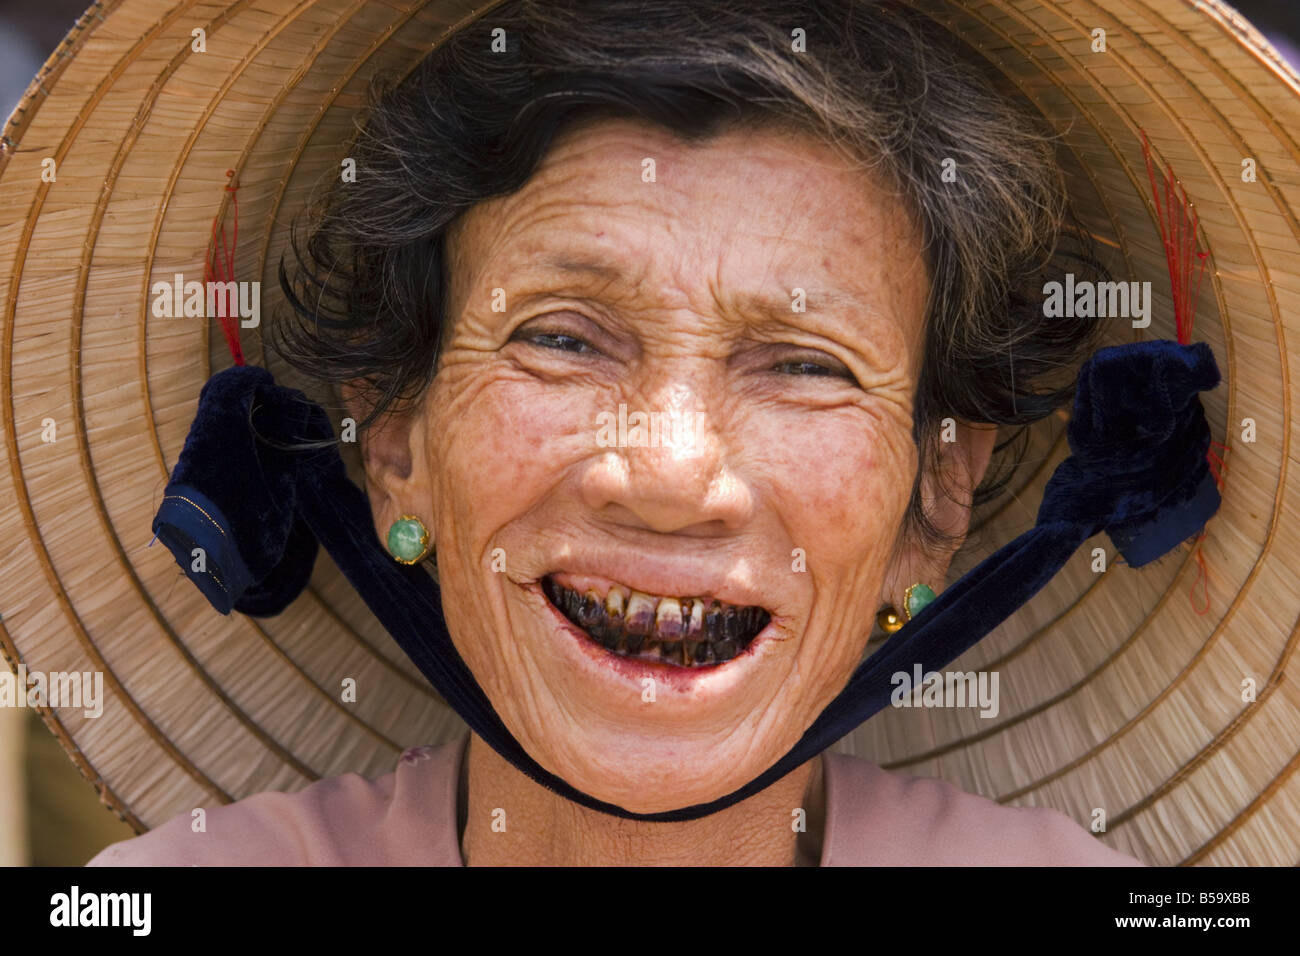 Smiling Vietnamese Woman With Teeth And Lips Stained From Chewing Betel Nut Hoi An Vietnam